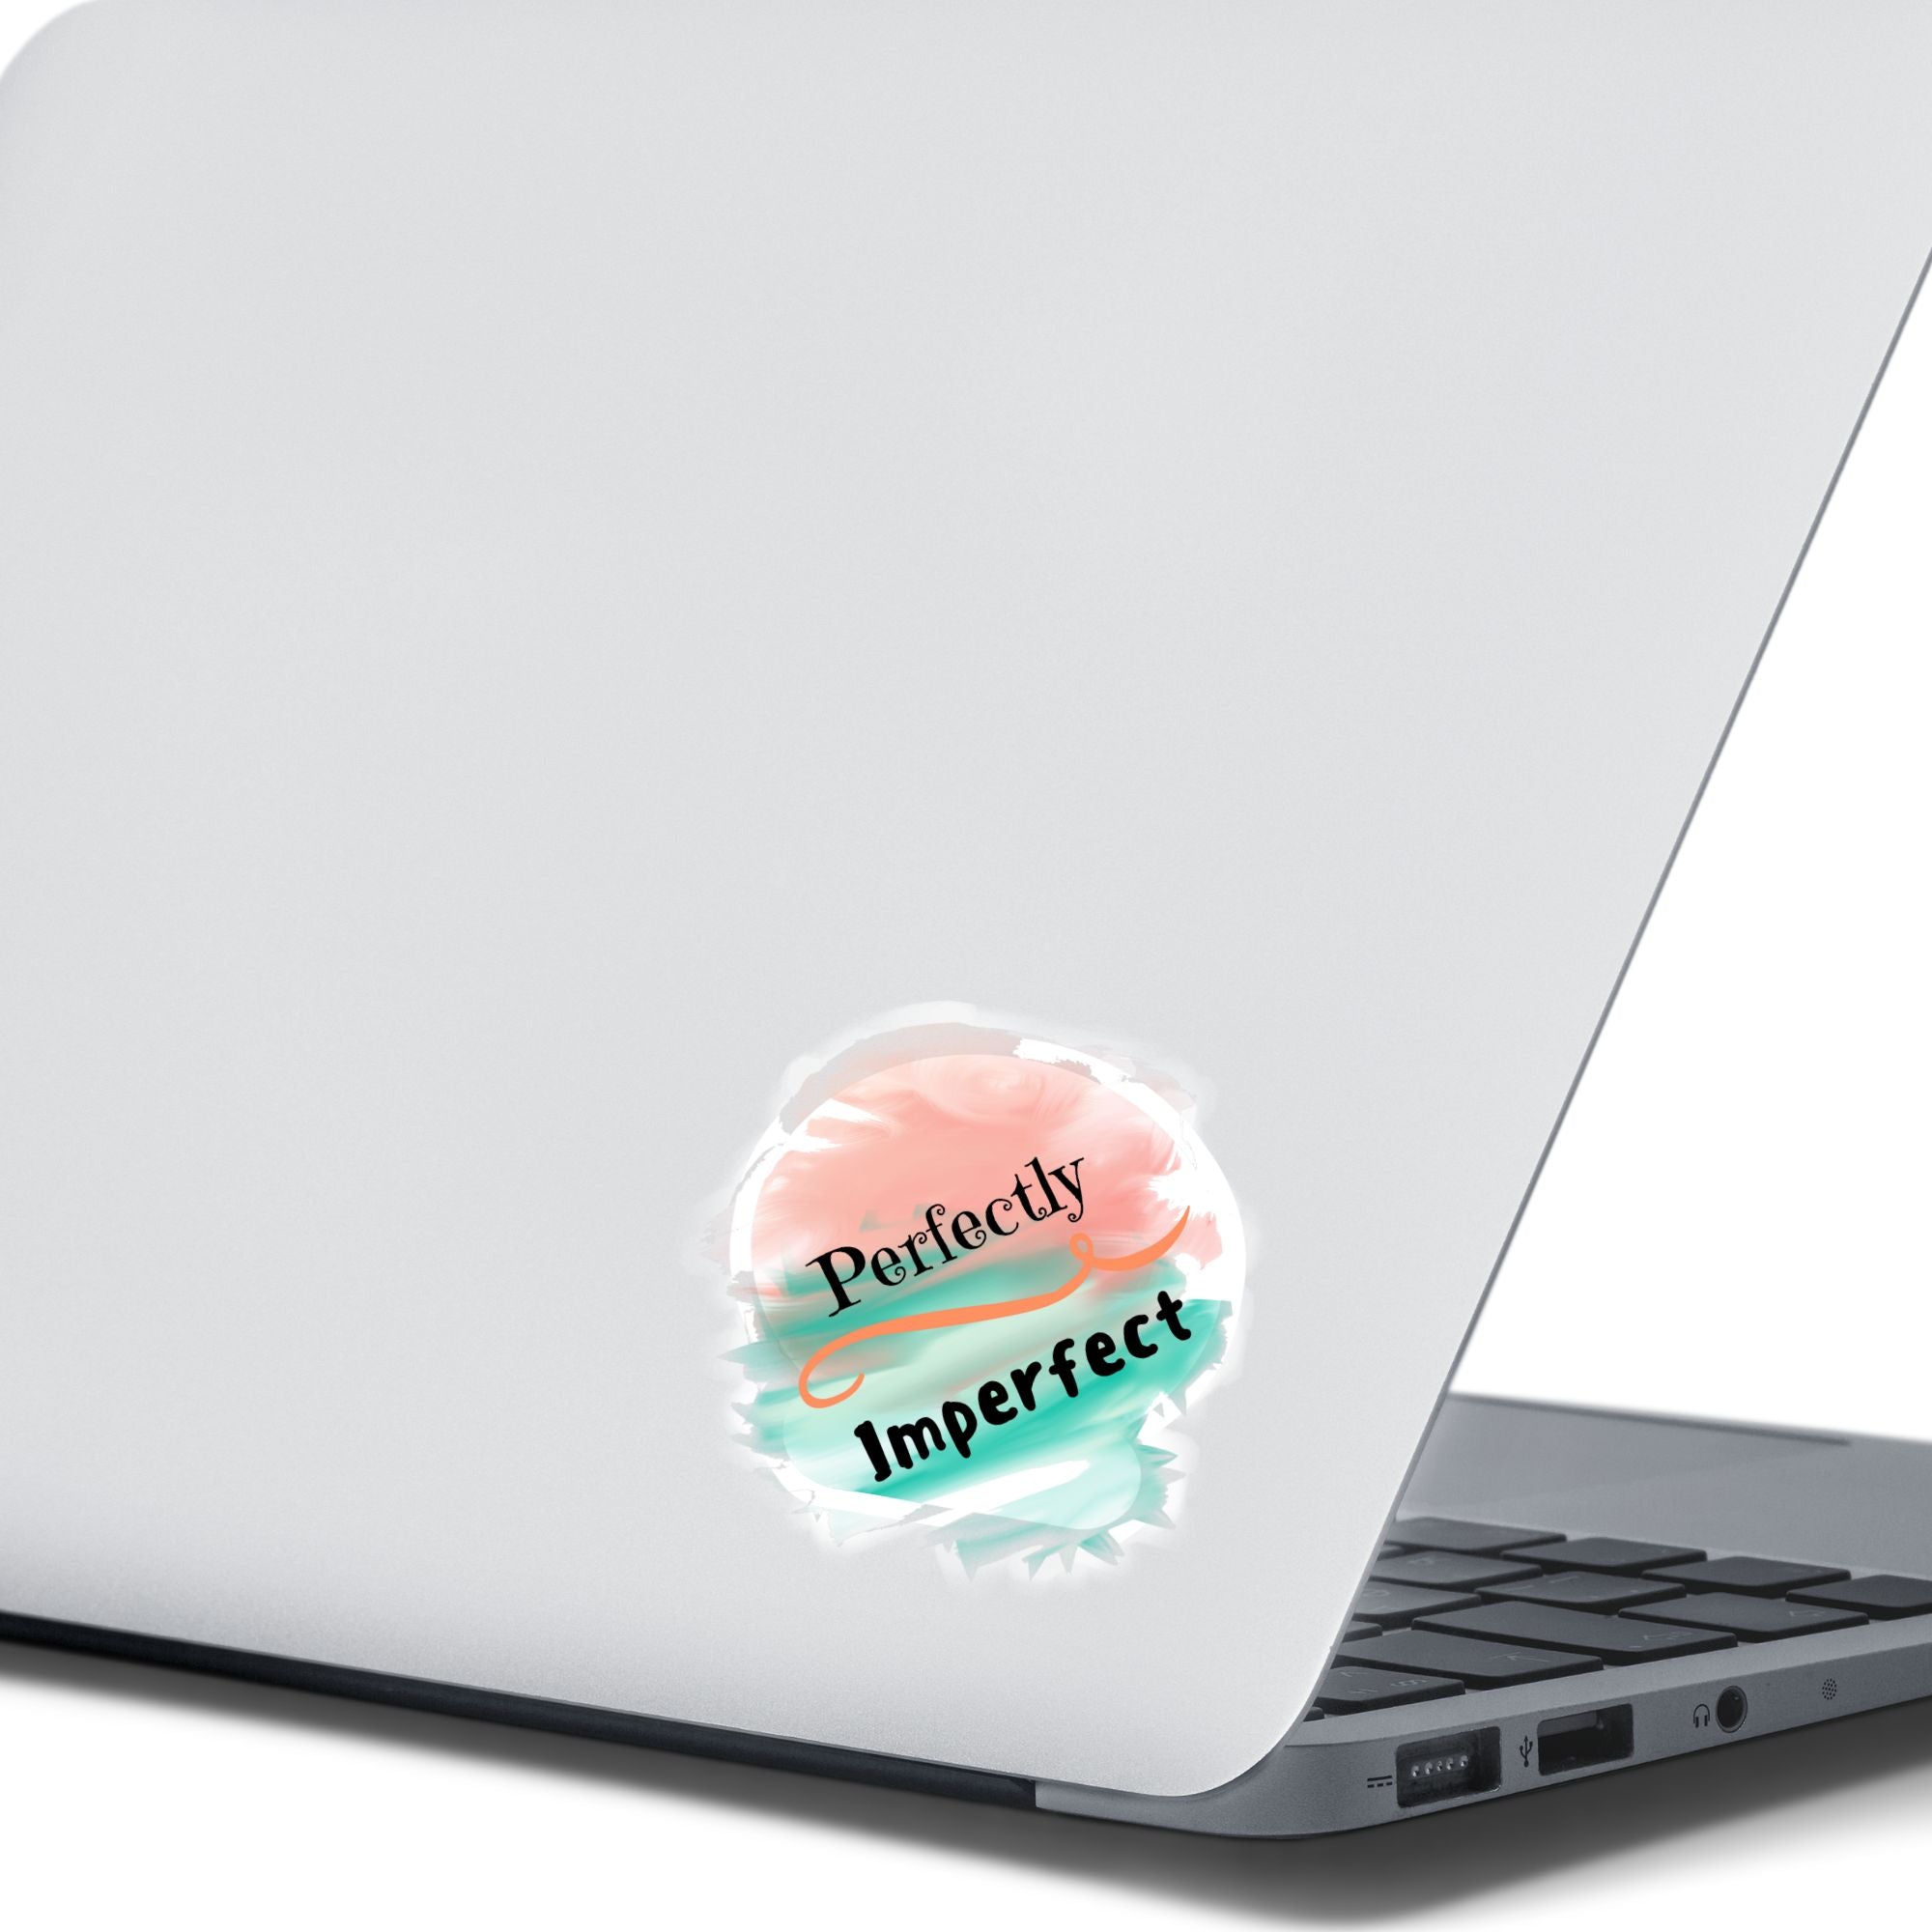 When you think about it, we're ALL Perfectly Imperfect! This inspirational die-cut sticker features the words Perfectly Imperfect on a cloudy pastel background. Check out our Inspirational collection for more inspiring stickers! This image shows the Perfectly Imperfect sticker on the back of an open laptop.